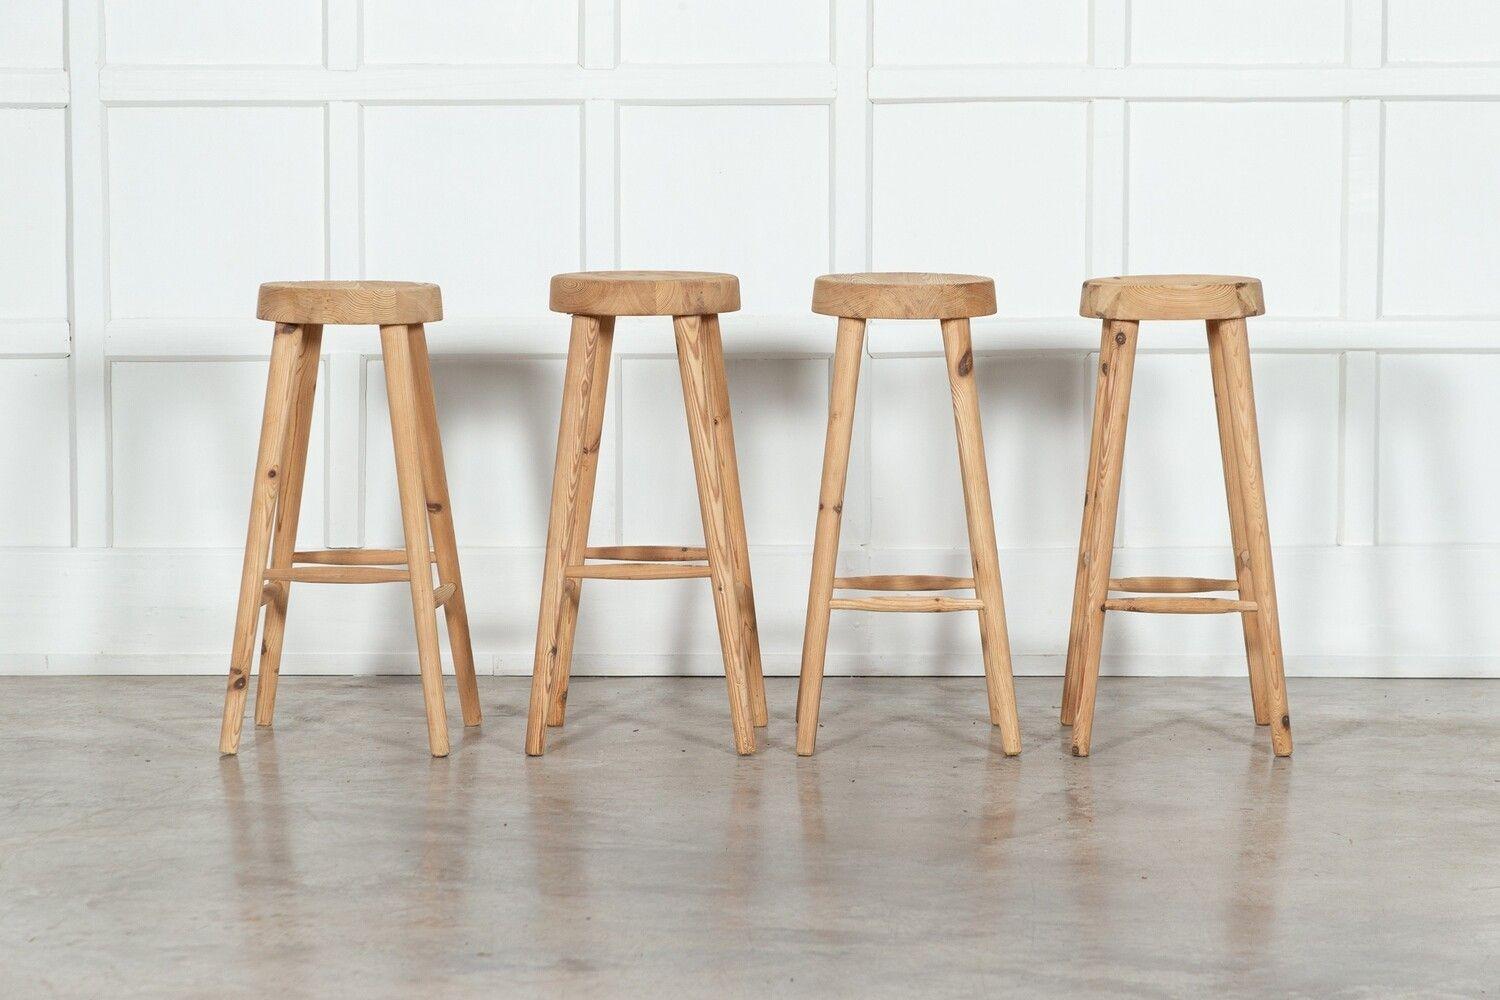 circa Mid 20thC
Set Four MidC Pine Artists Stools in the Style of Charlotte Perriand.
Provenance: Art School in Dorset England.
sku 1572
W26 x D26 x H68 cm